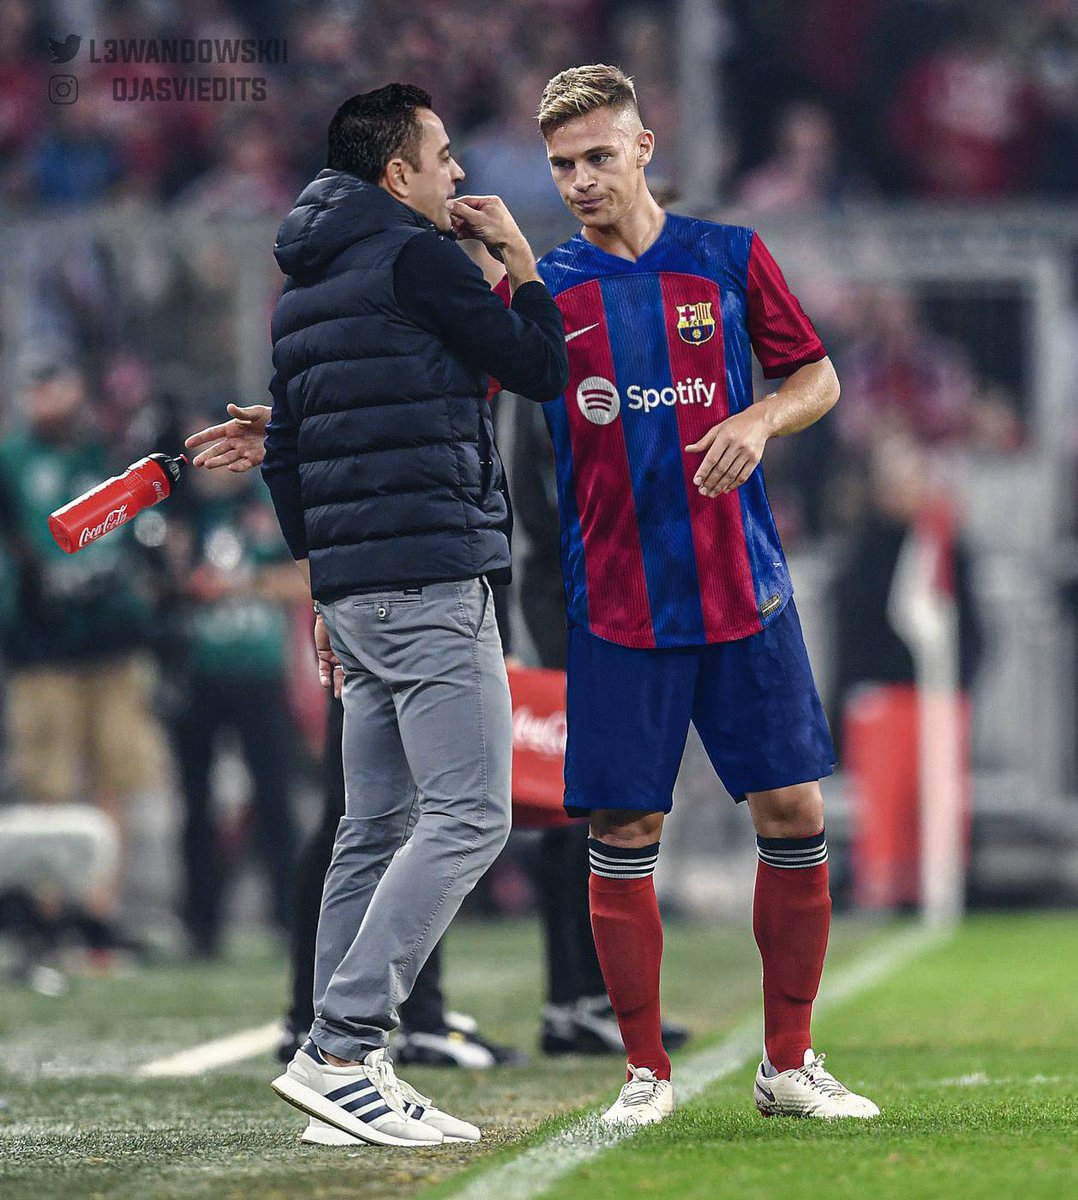 Thoughts on this possible linkup next season? #fcblive 👀🔥